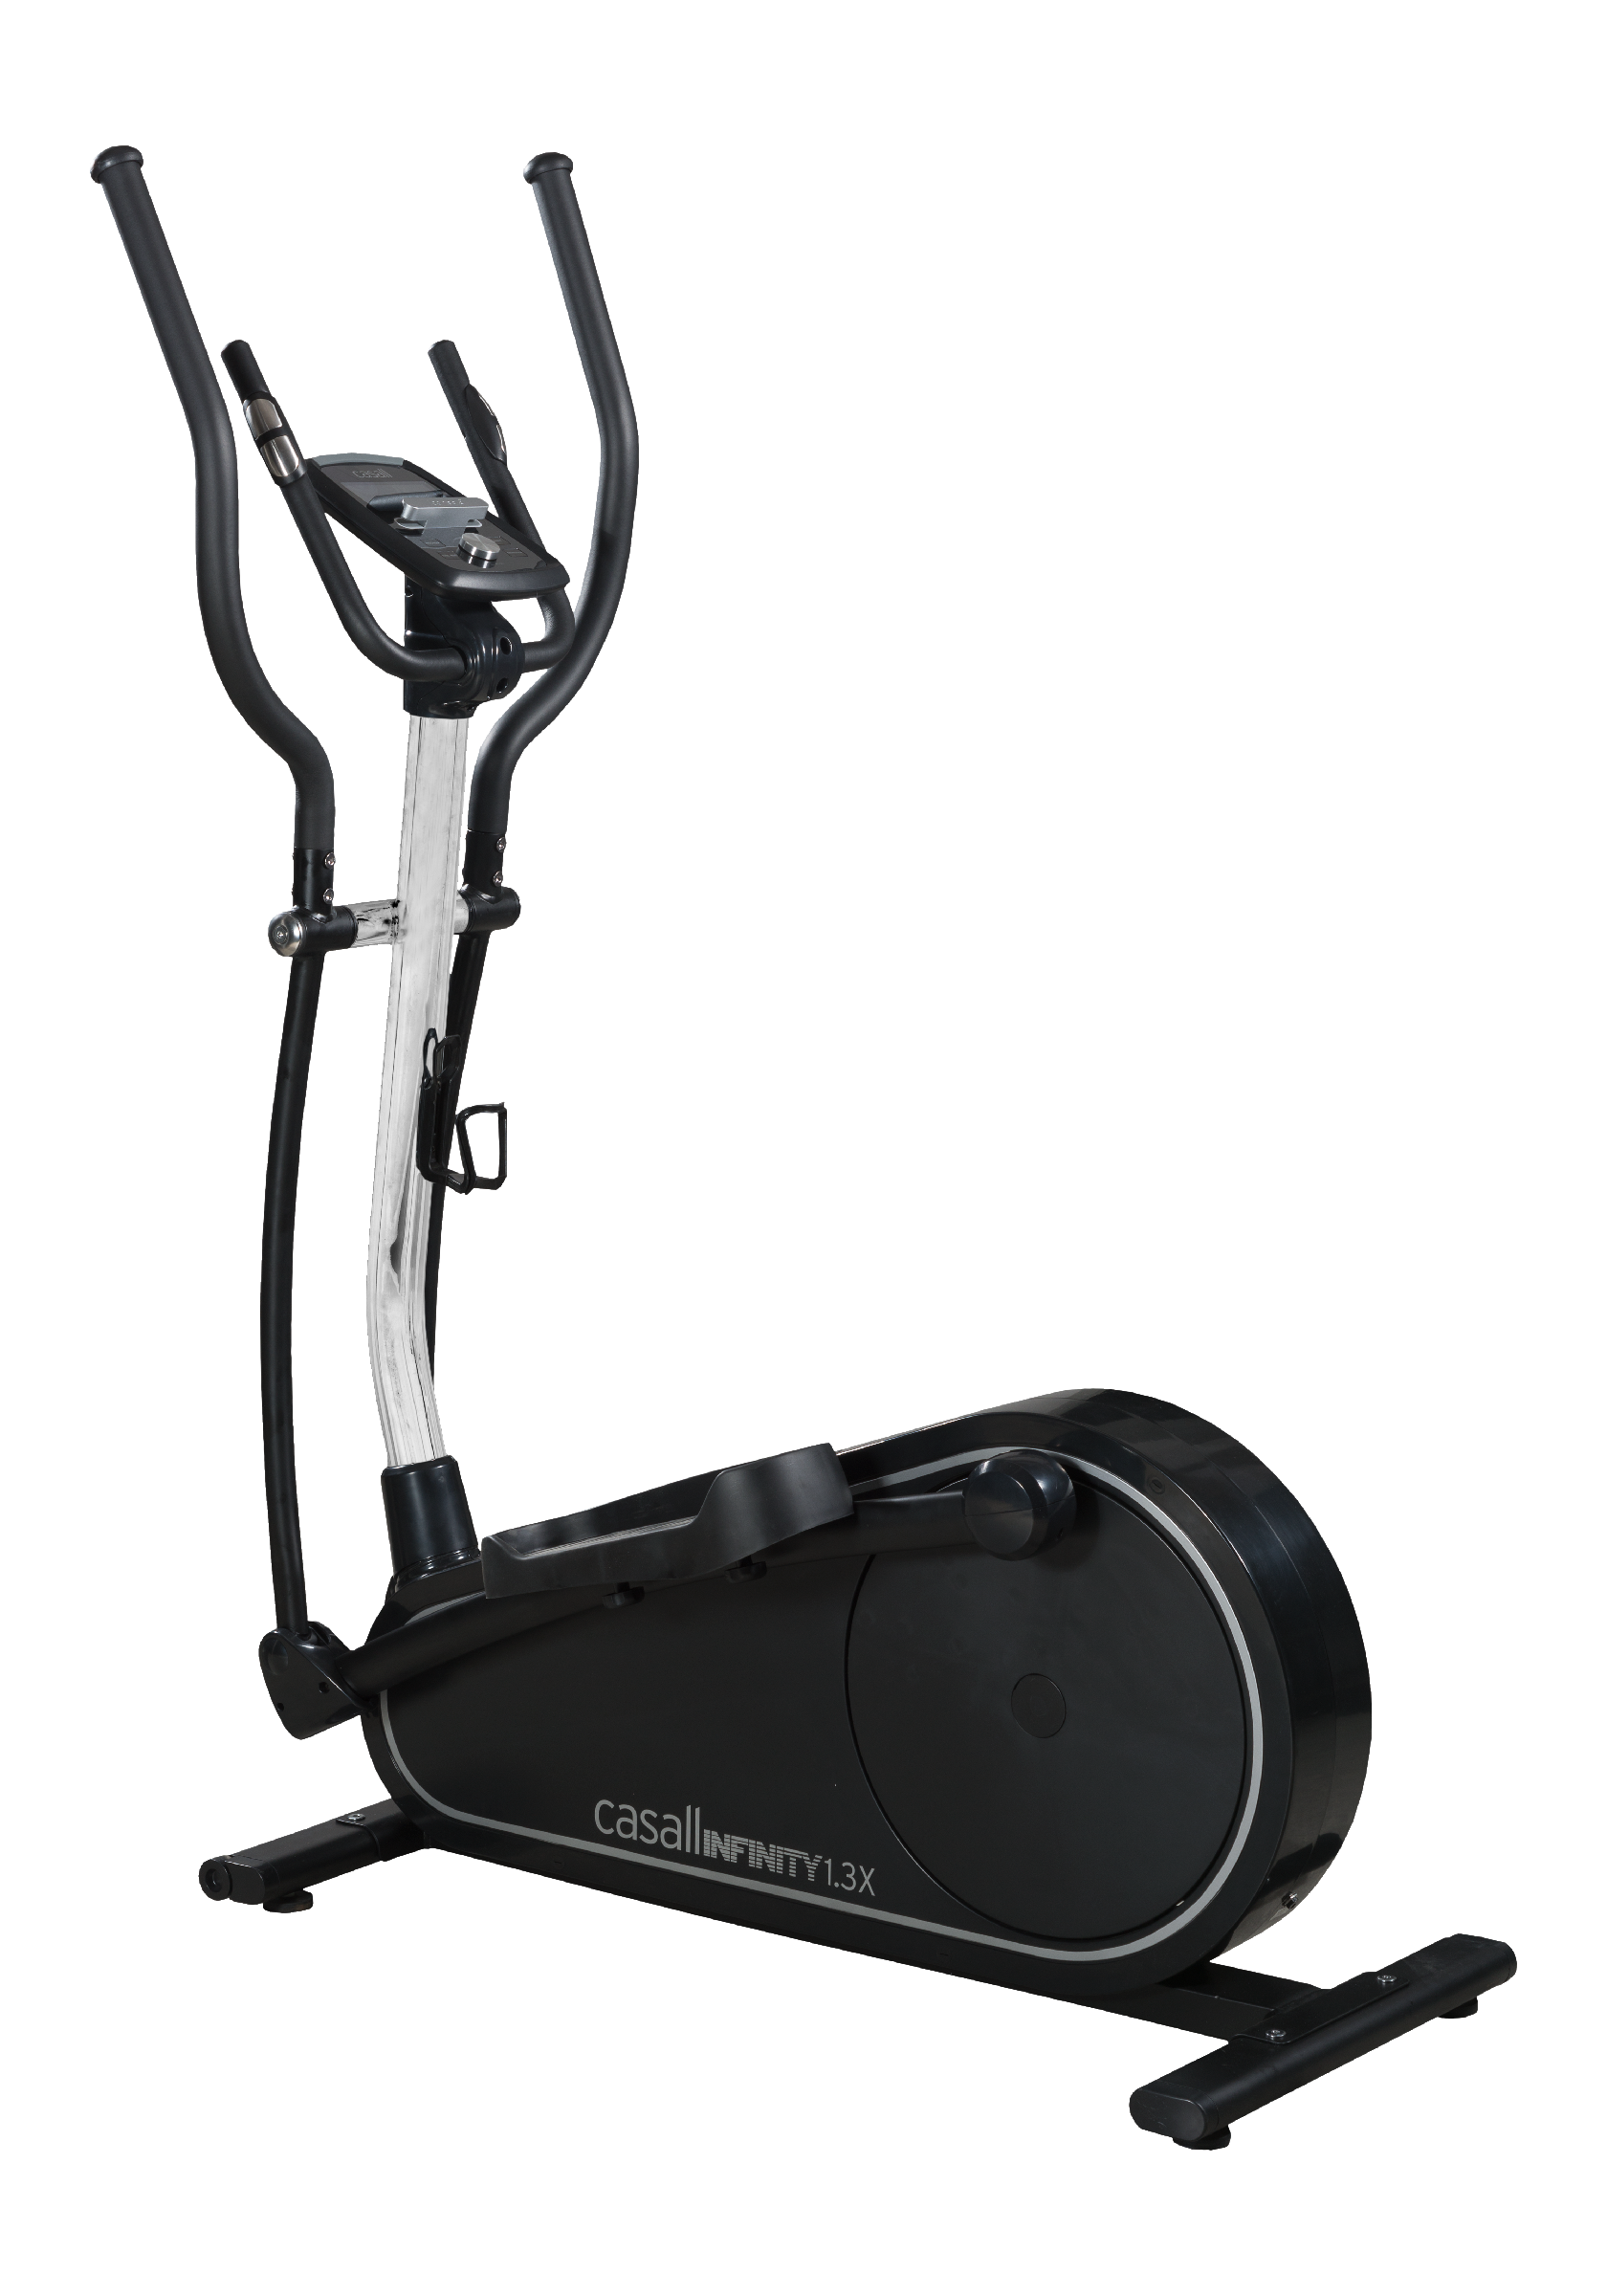 Crosstrainer Infinity 1,3X iConsole - Black/silver